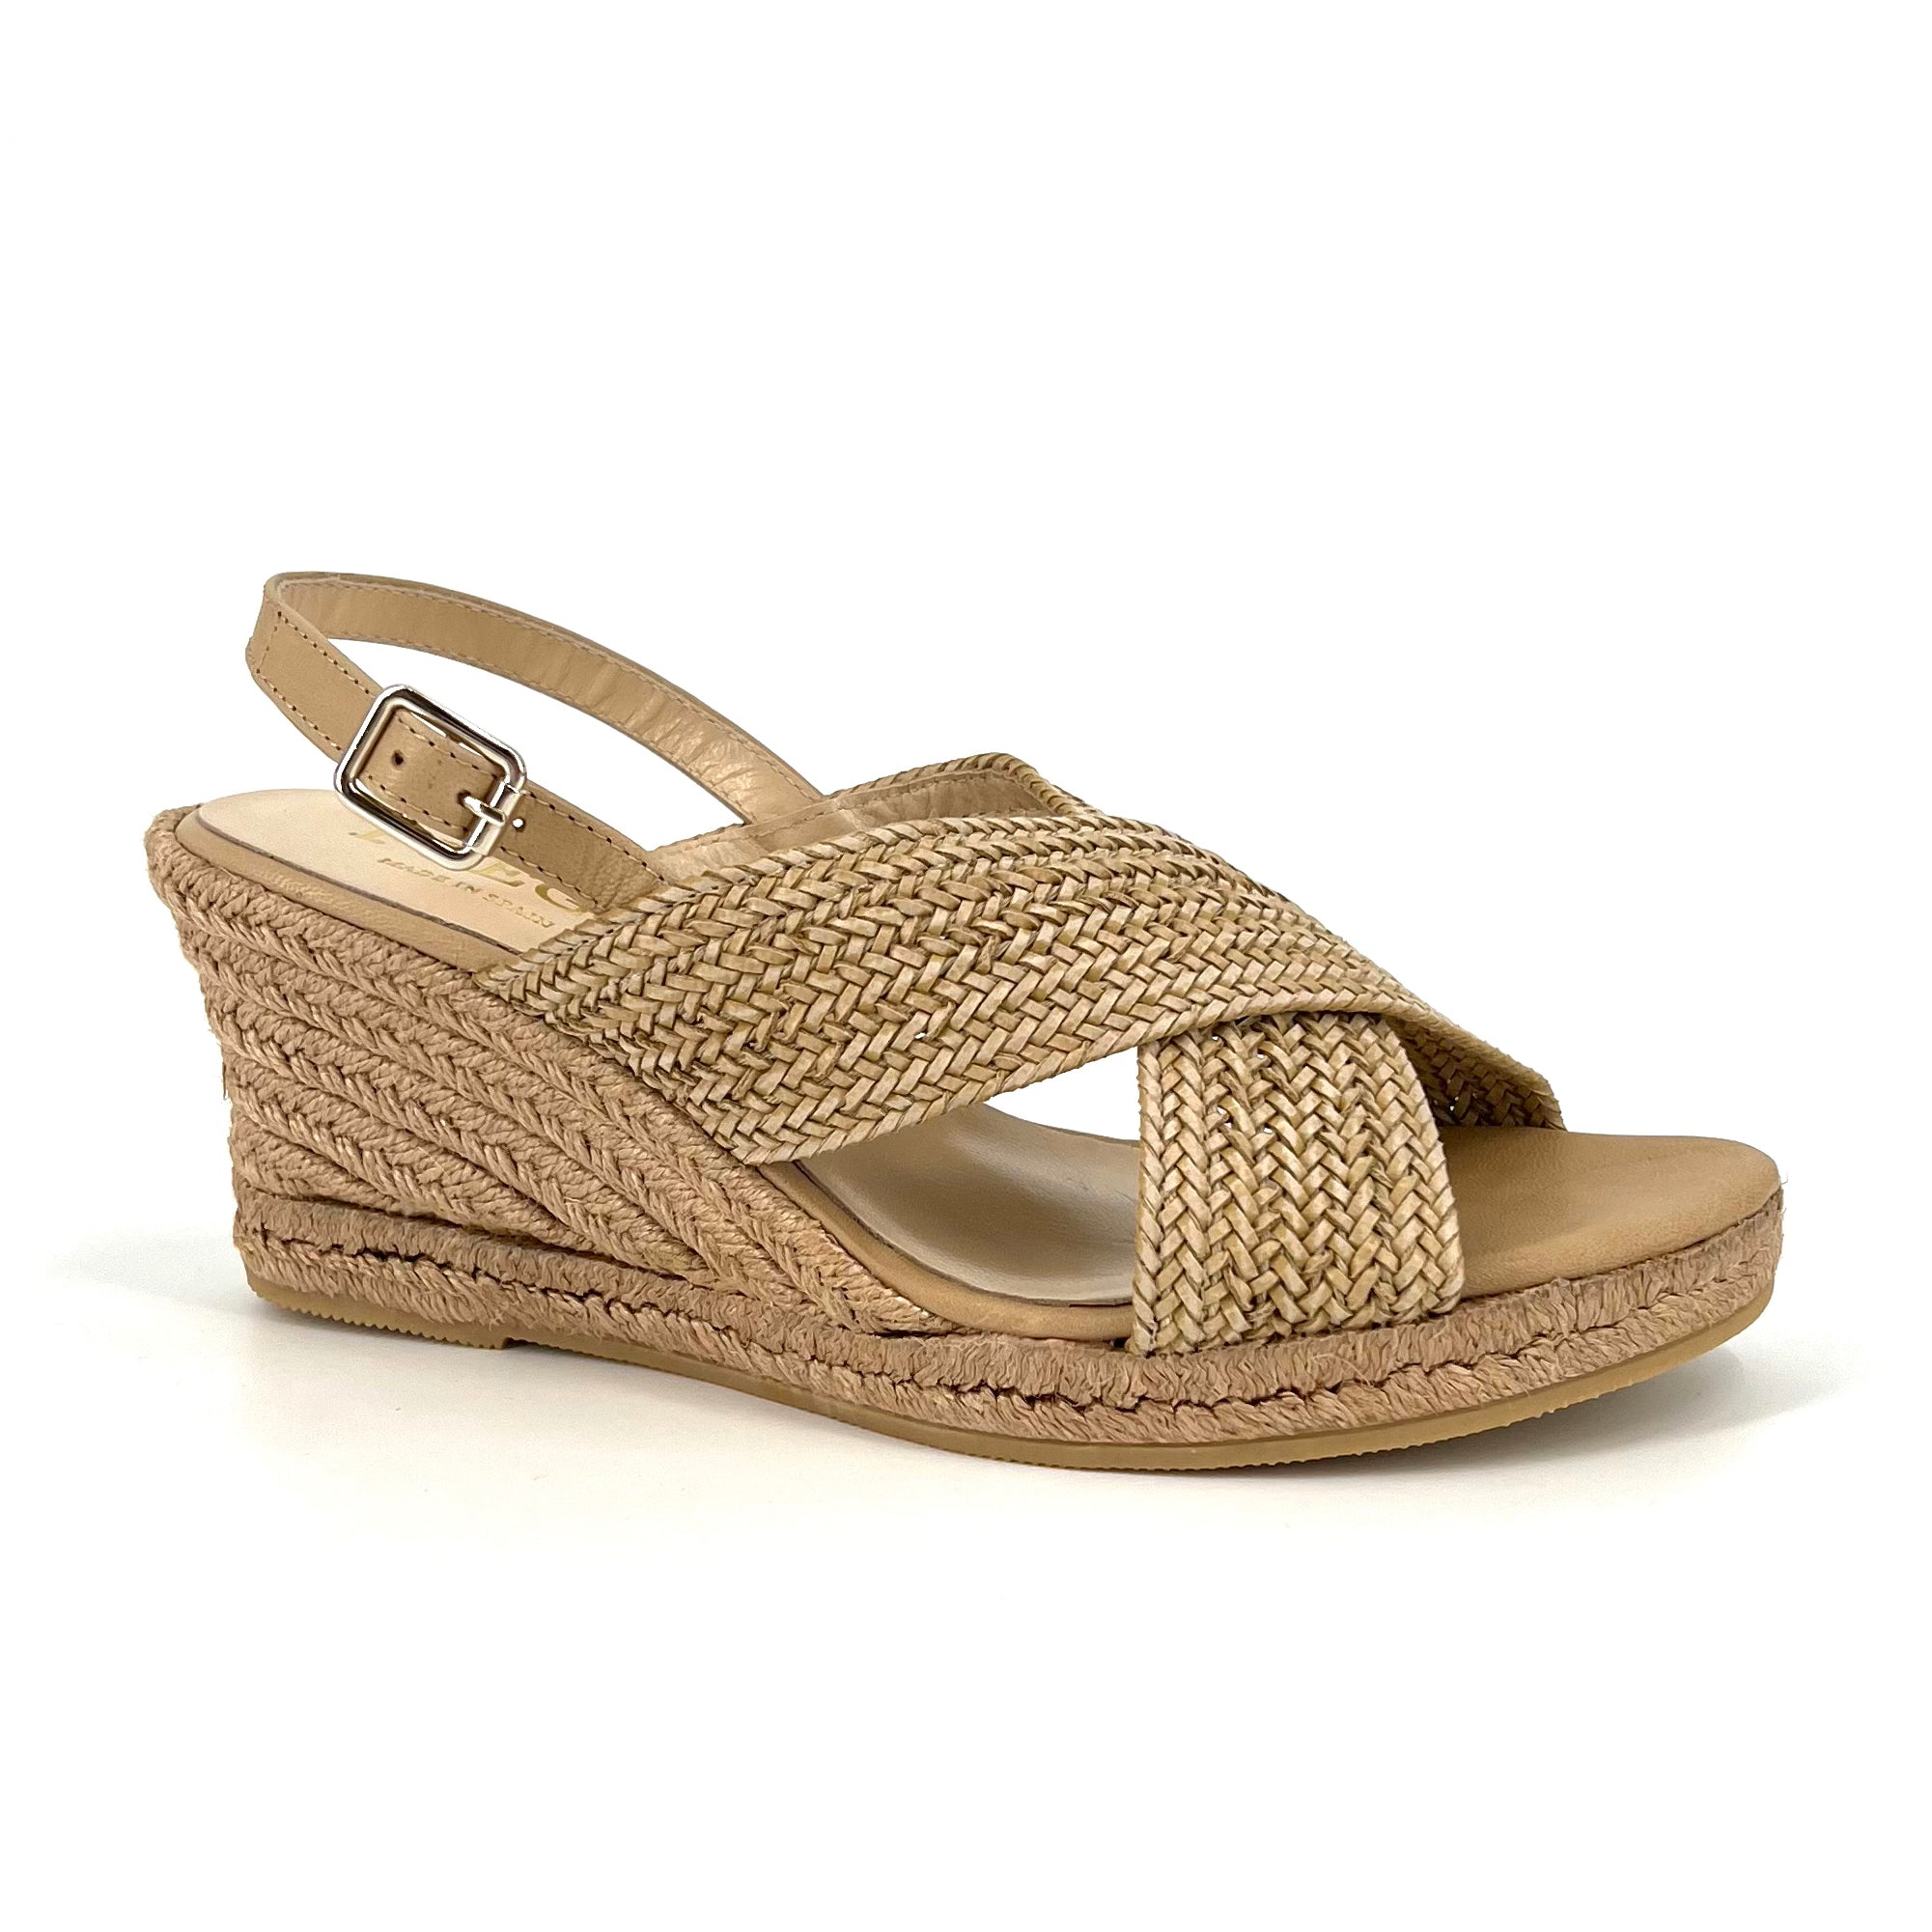 The Woven Leather Espadrille in Natural